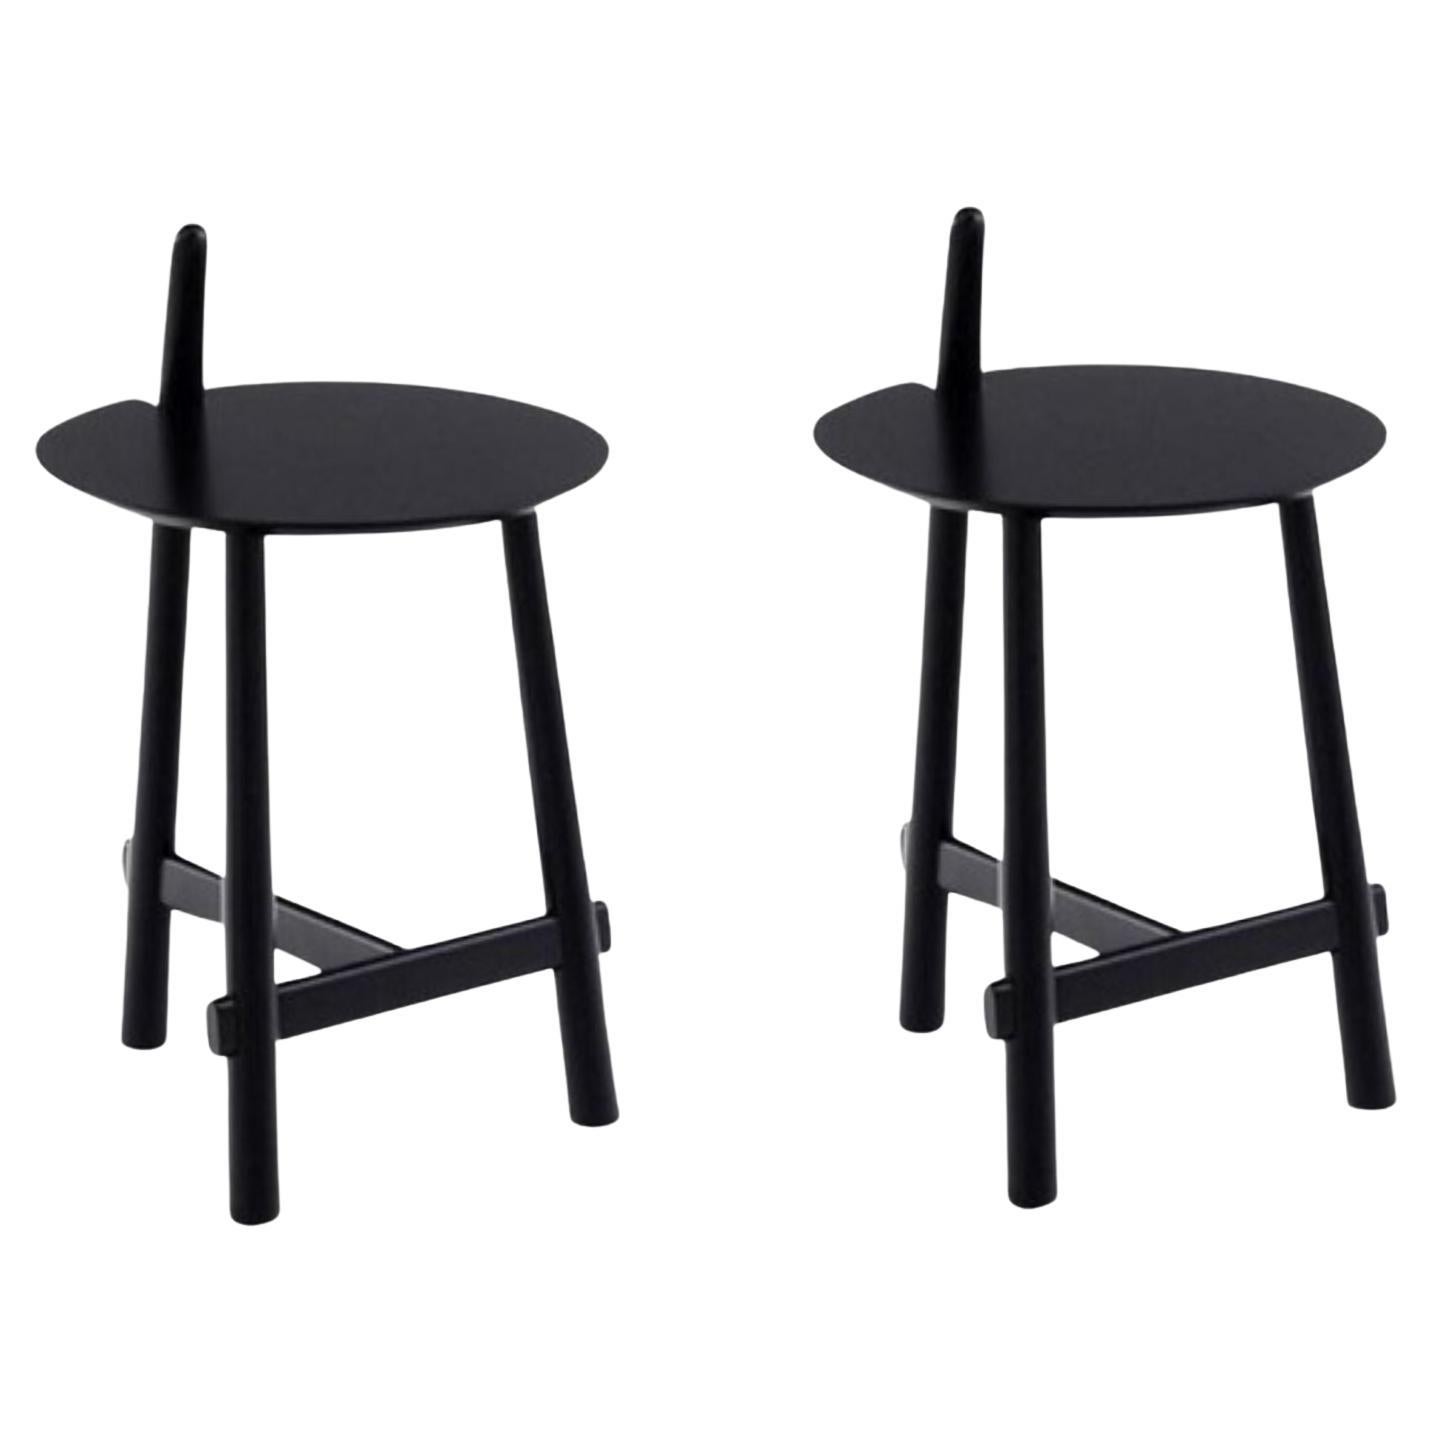 Set of 2 Black Altay Side Tables by Patricia Urquiola For Sale